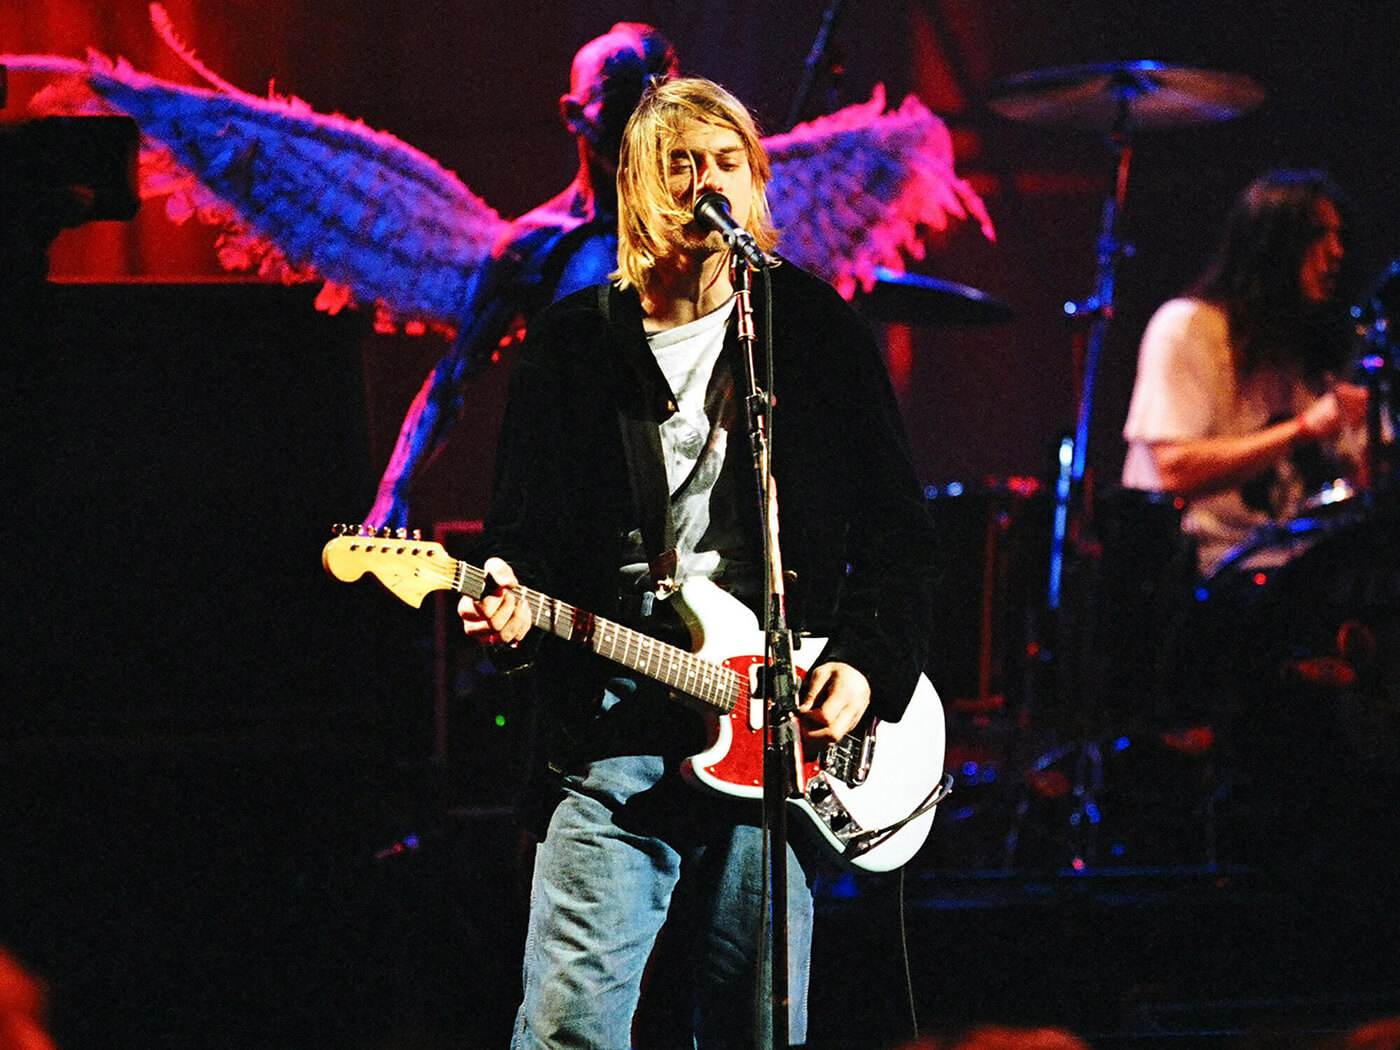 Kurt Cobain performing with Nirvana during MTV Live and Loud in 1993, photo by Jeff Kravitz/FilmMagic, Inc via Getty Images